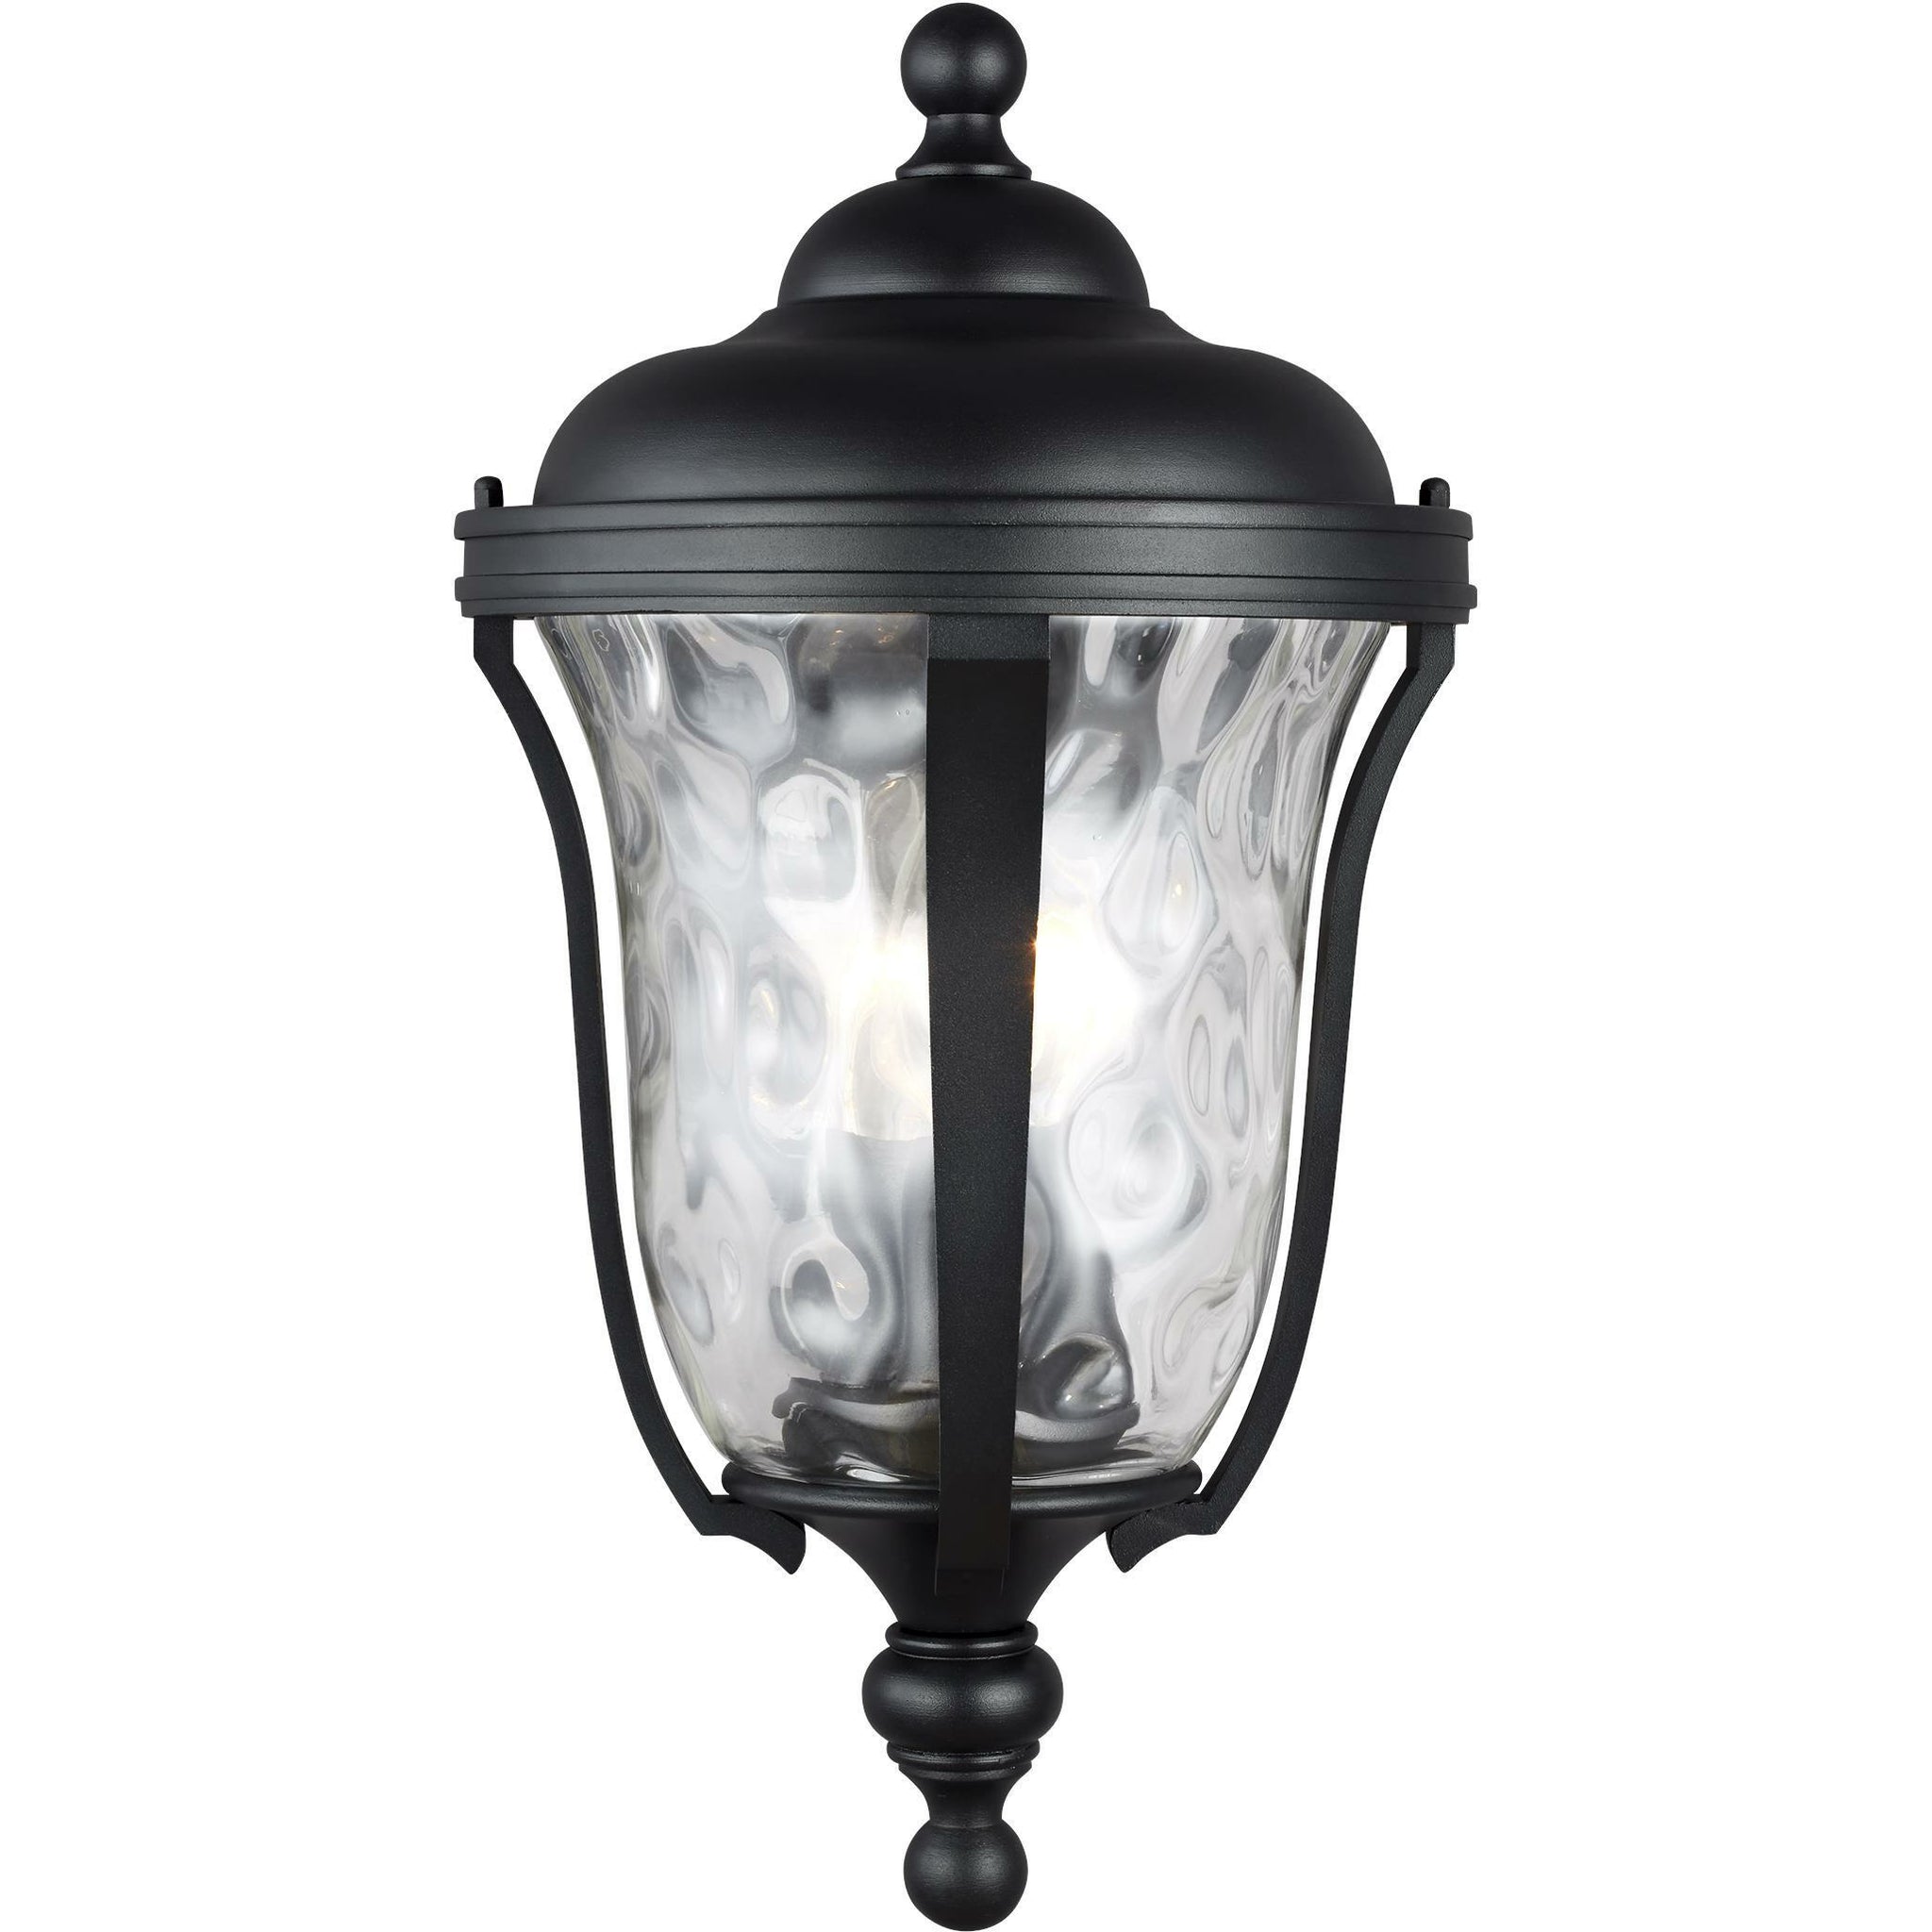 Perrywood Outdoor Wall Light Black